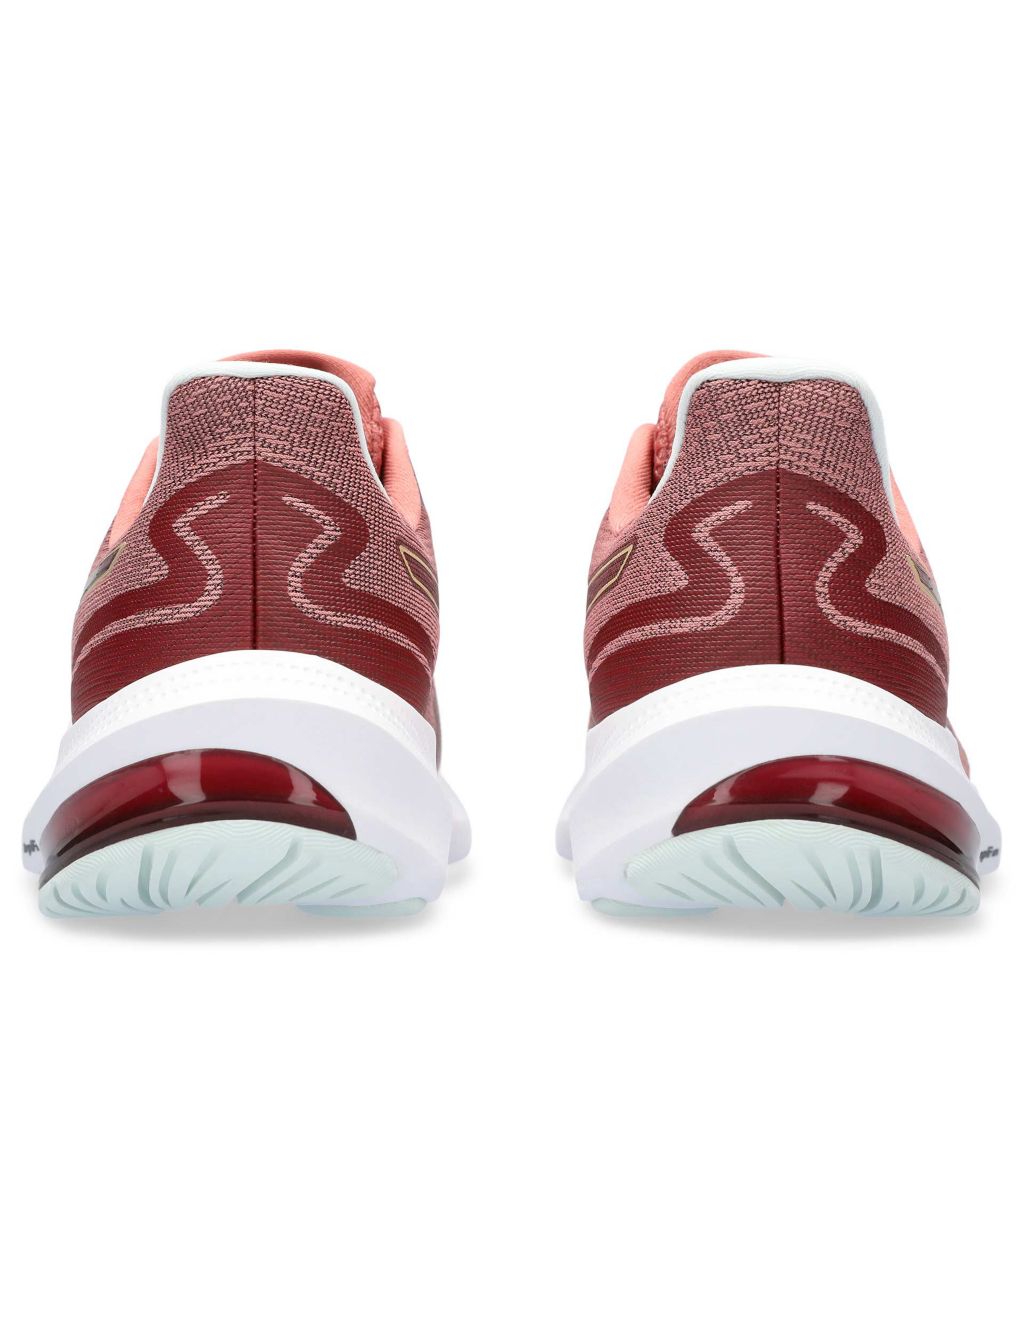 GEL-PULSE™ 14 Trainers image 4